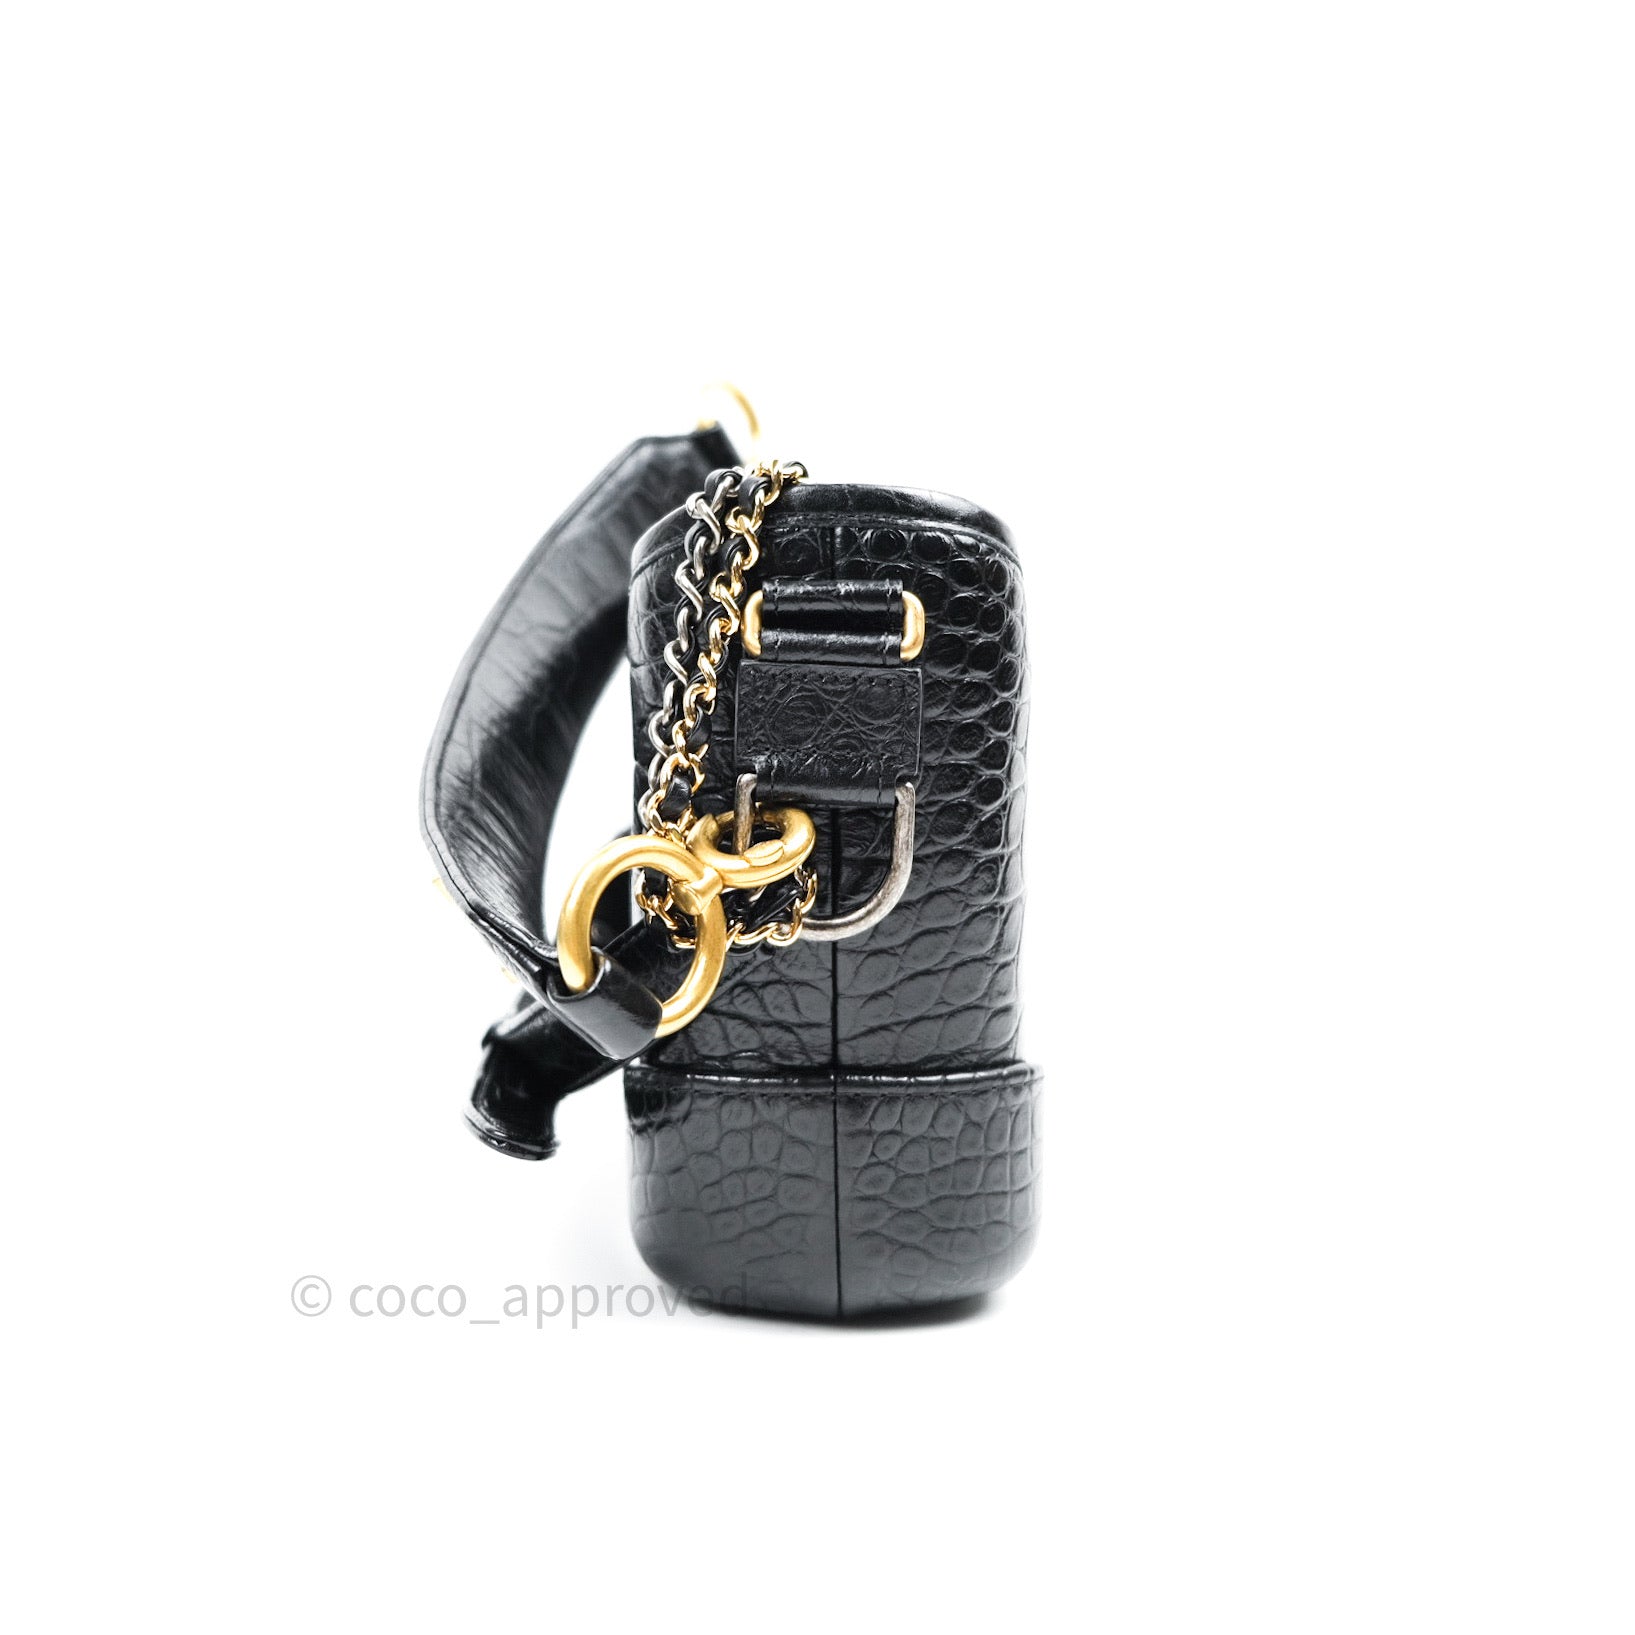 Chanel Gabrielle small hobo bag crocodile embossed calfskin,gold-tone and  silver-tone metal black coded❌sold❌